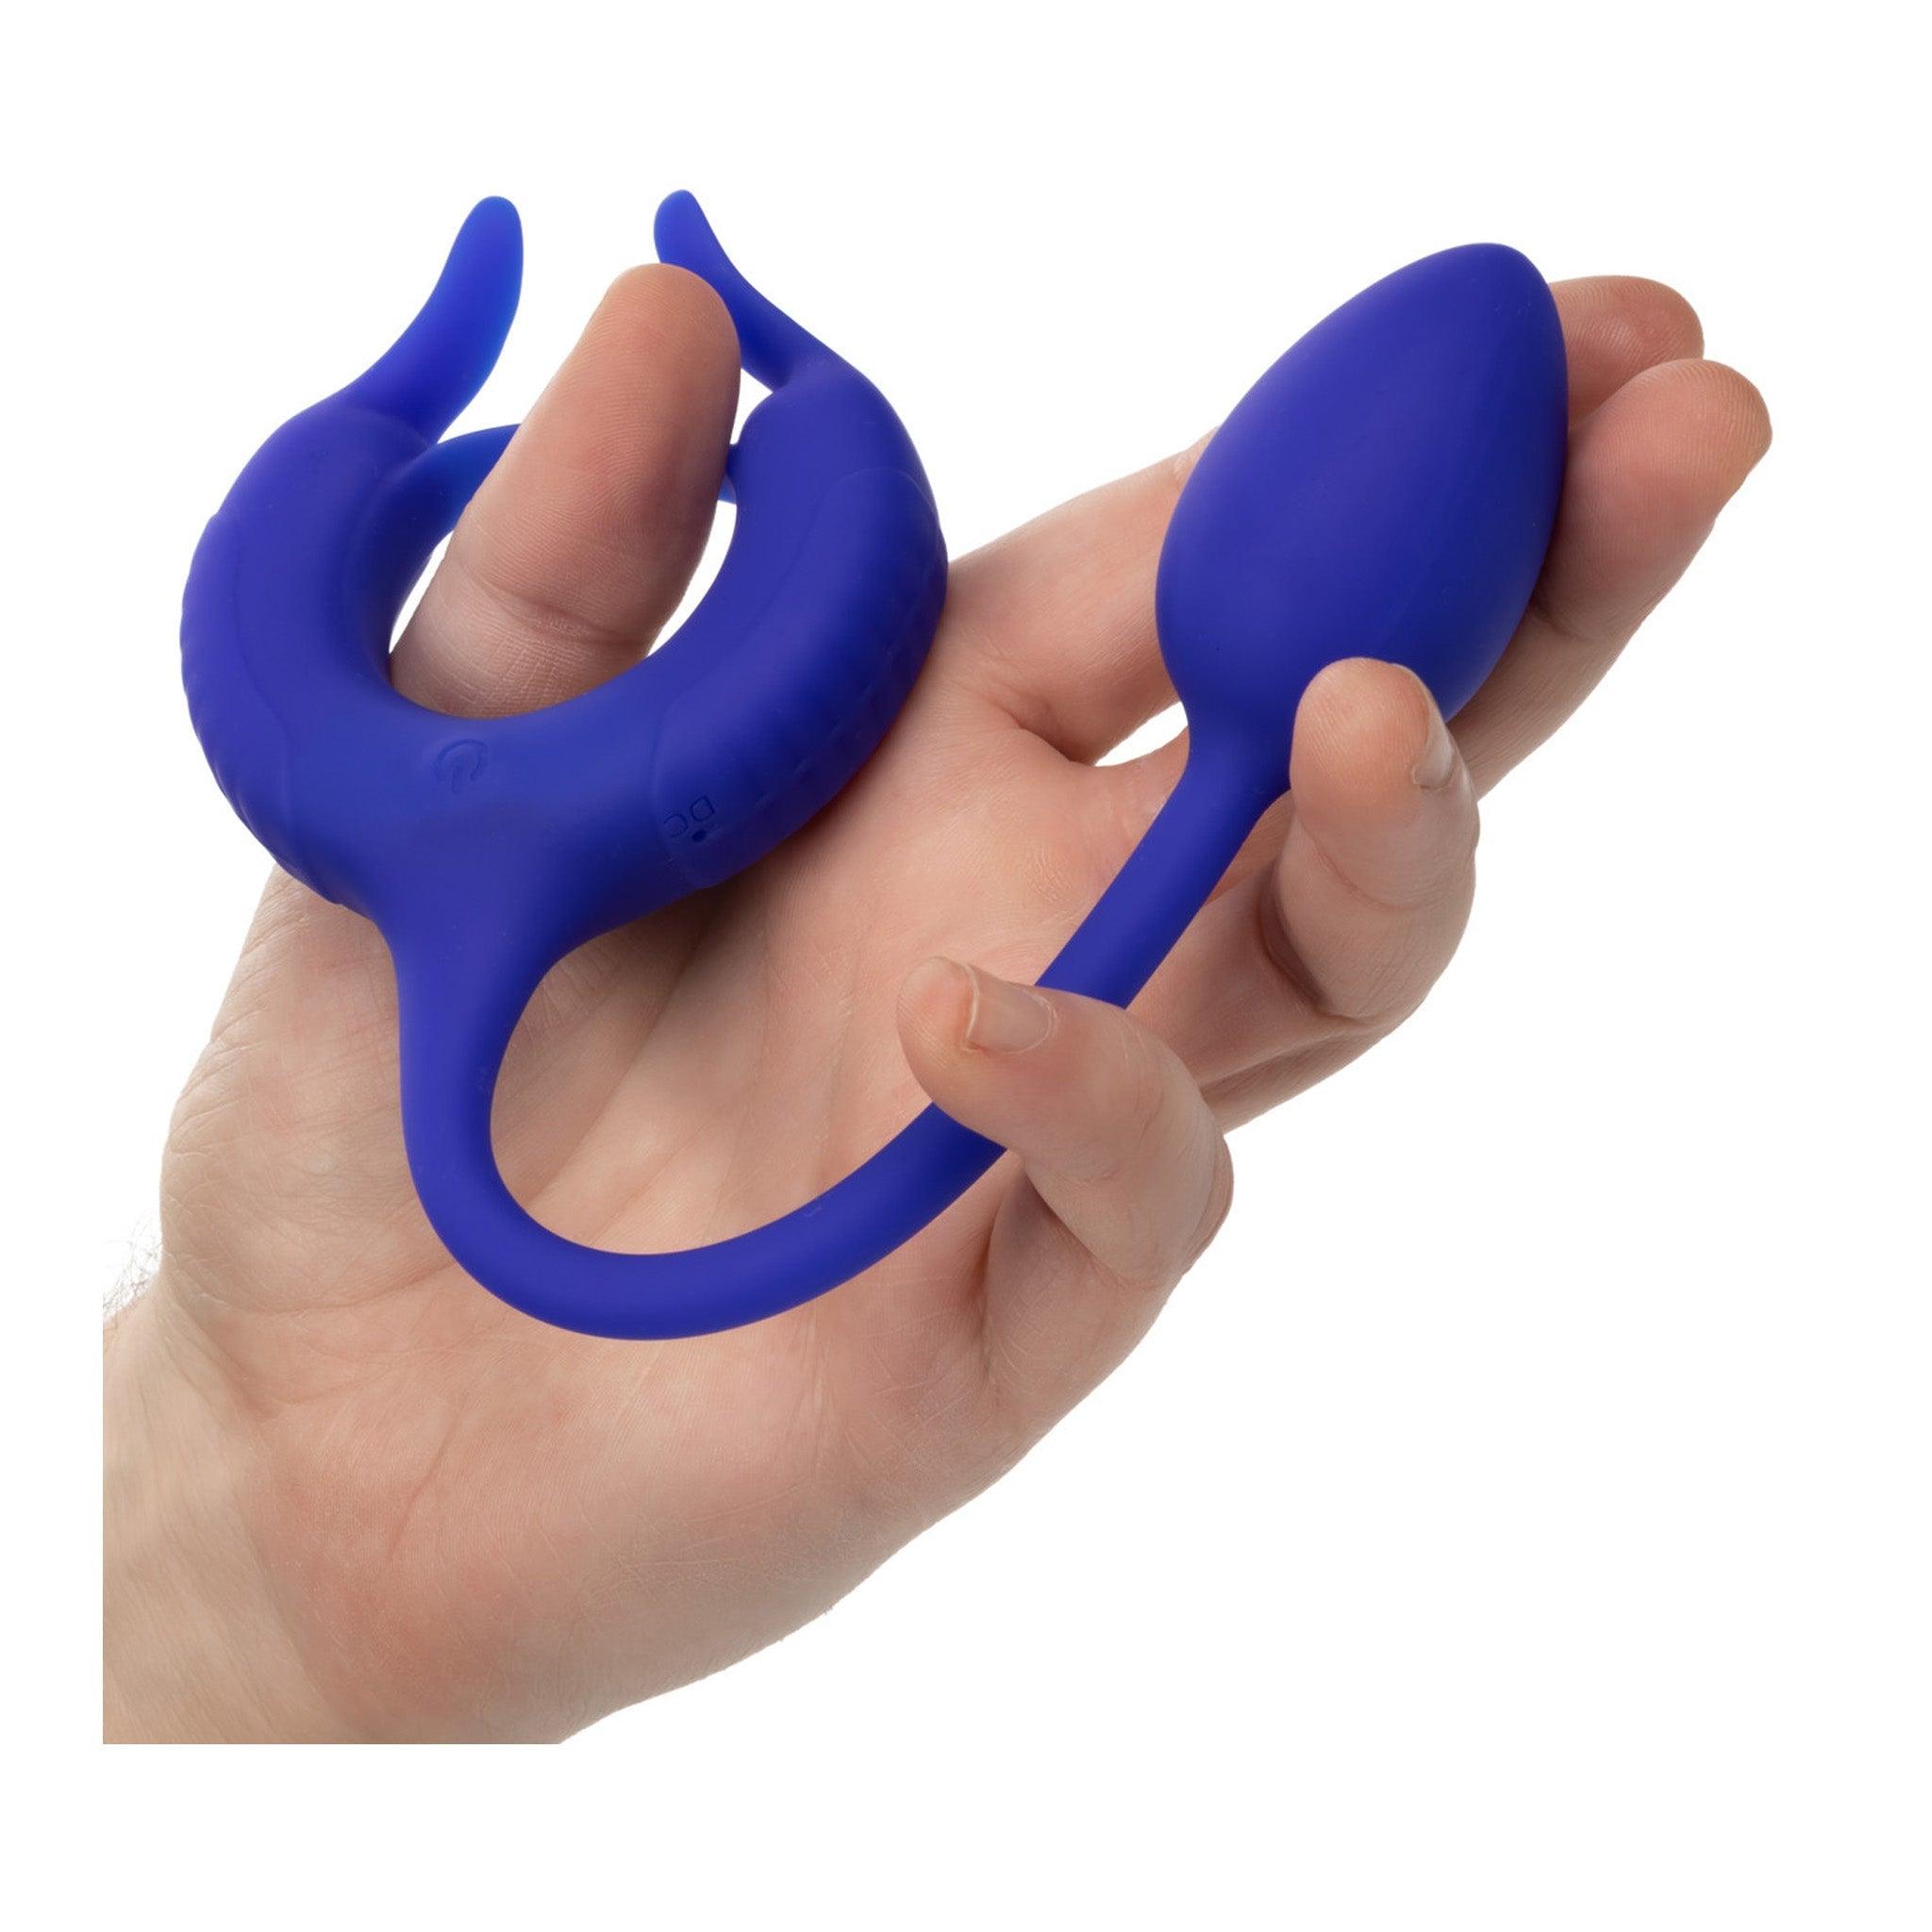 Admiral Plug and Play Vibrating Weighted Cock Ring - Rechargable - CheapLubes.com